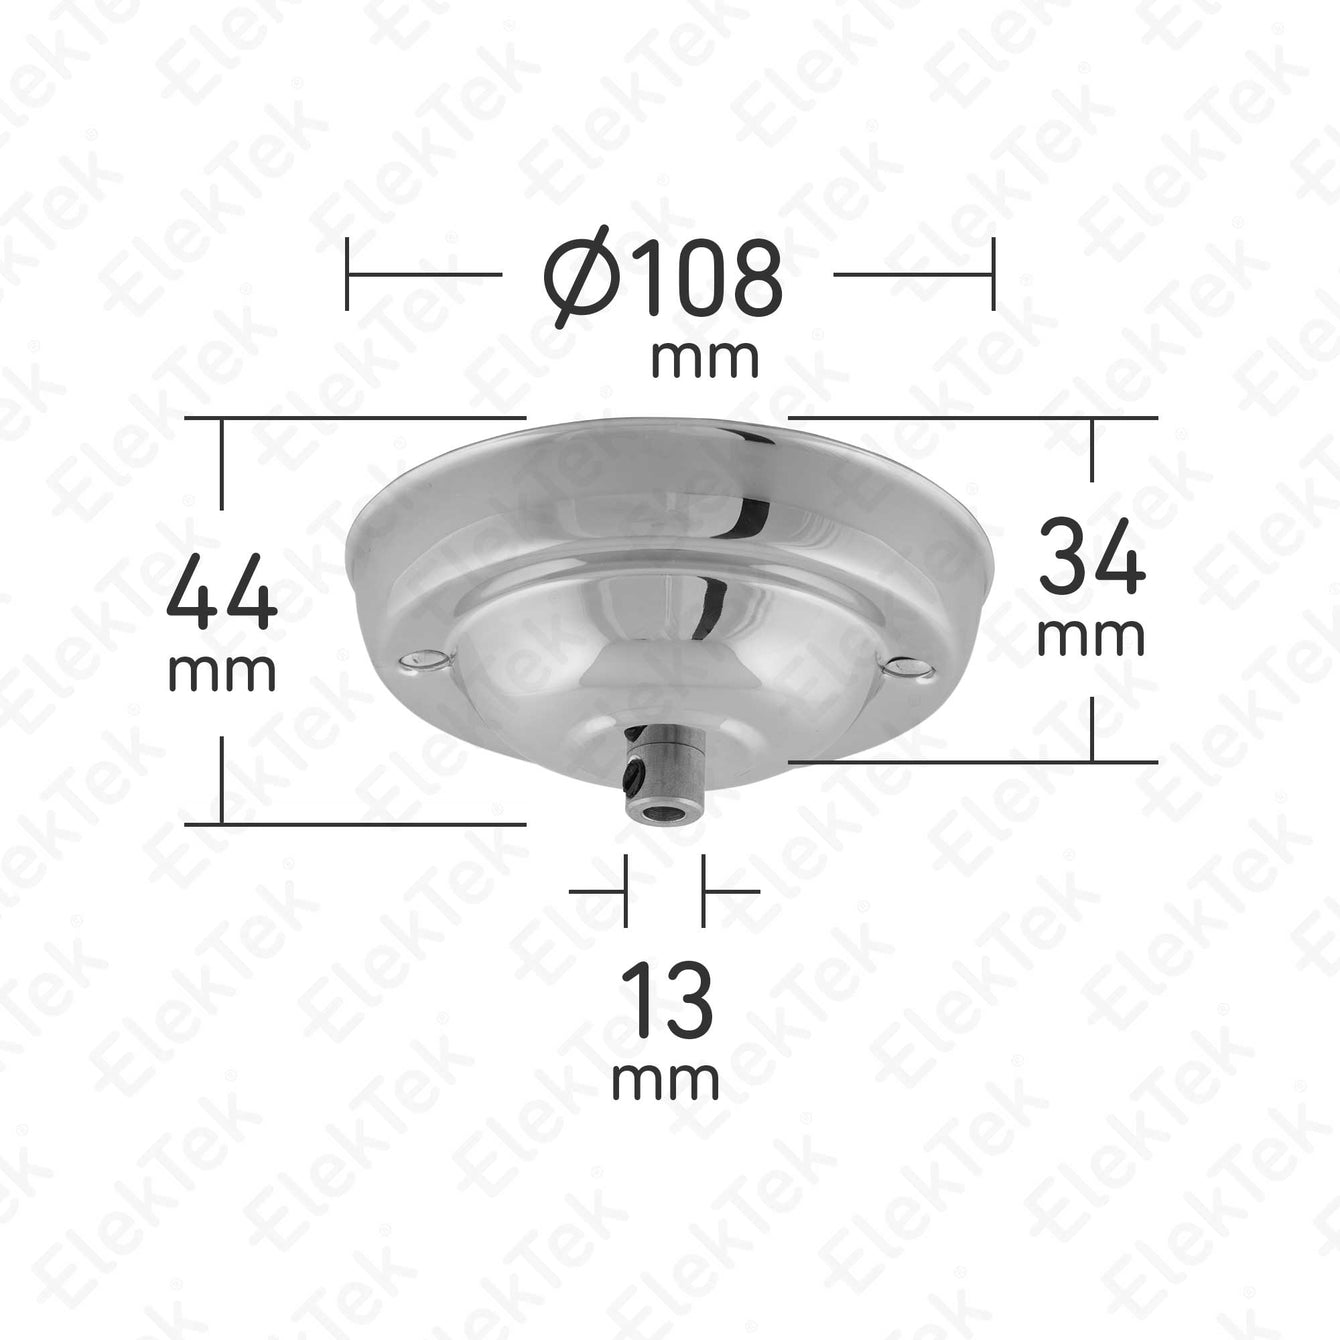 ElekTek 108mm Diameter Ceiling Rose with Cord Grip Metallic Finishes Powder Coated Colours For Light Fittings and Chandeliers Chrome